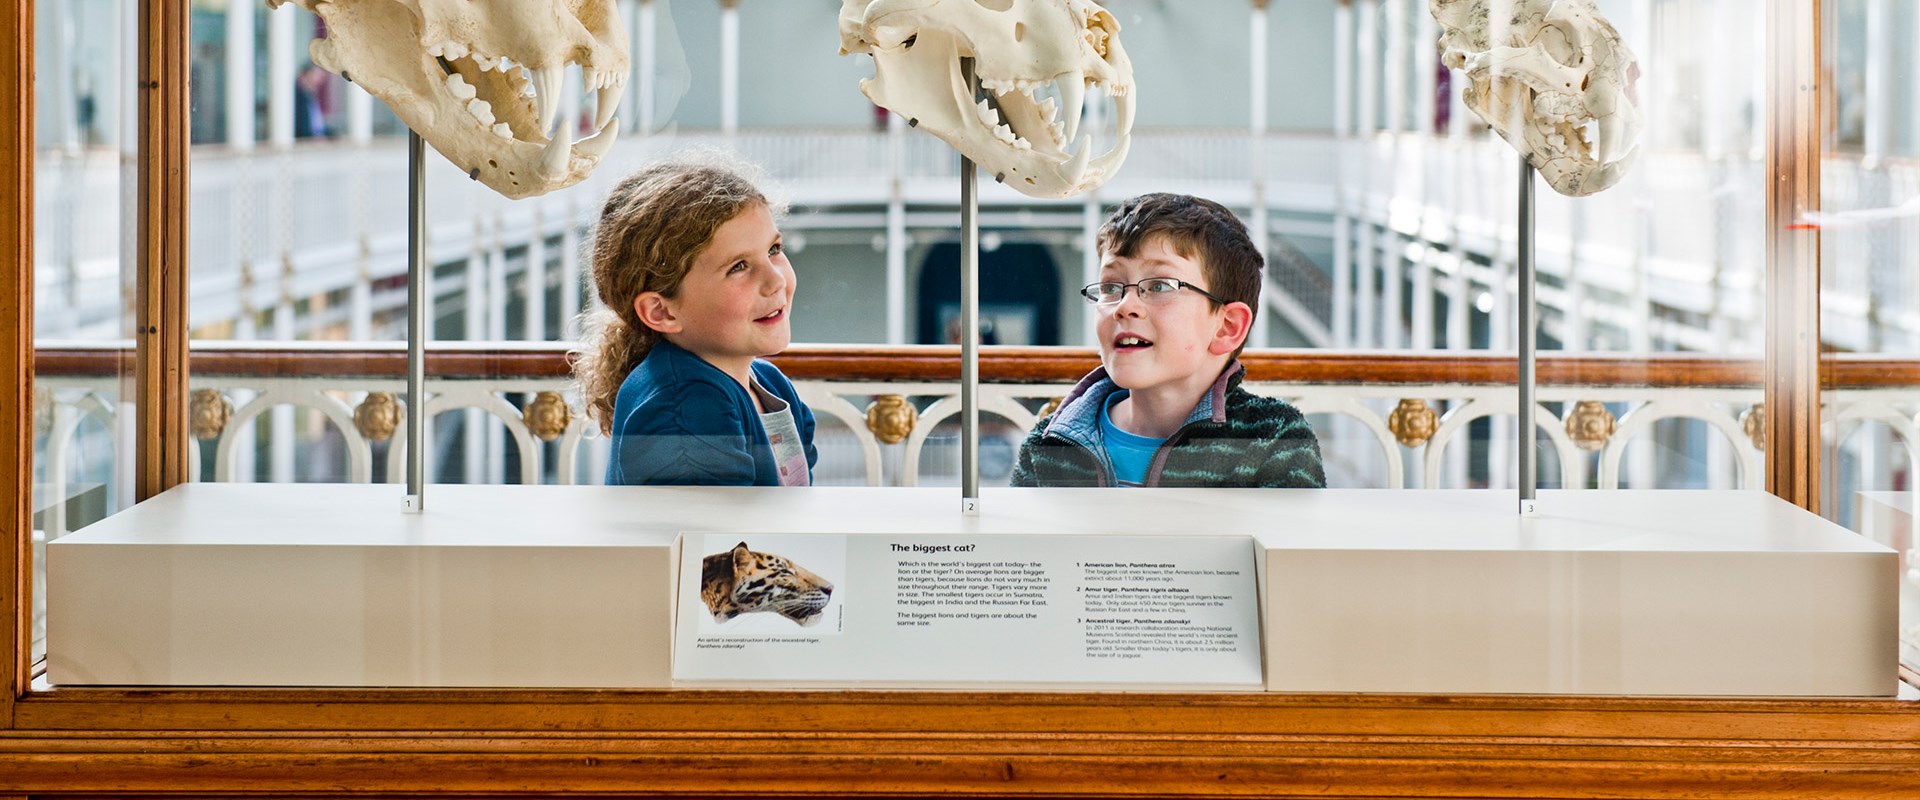 Two kids looking at big cat skulls in a glass case.